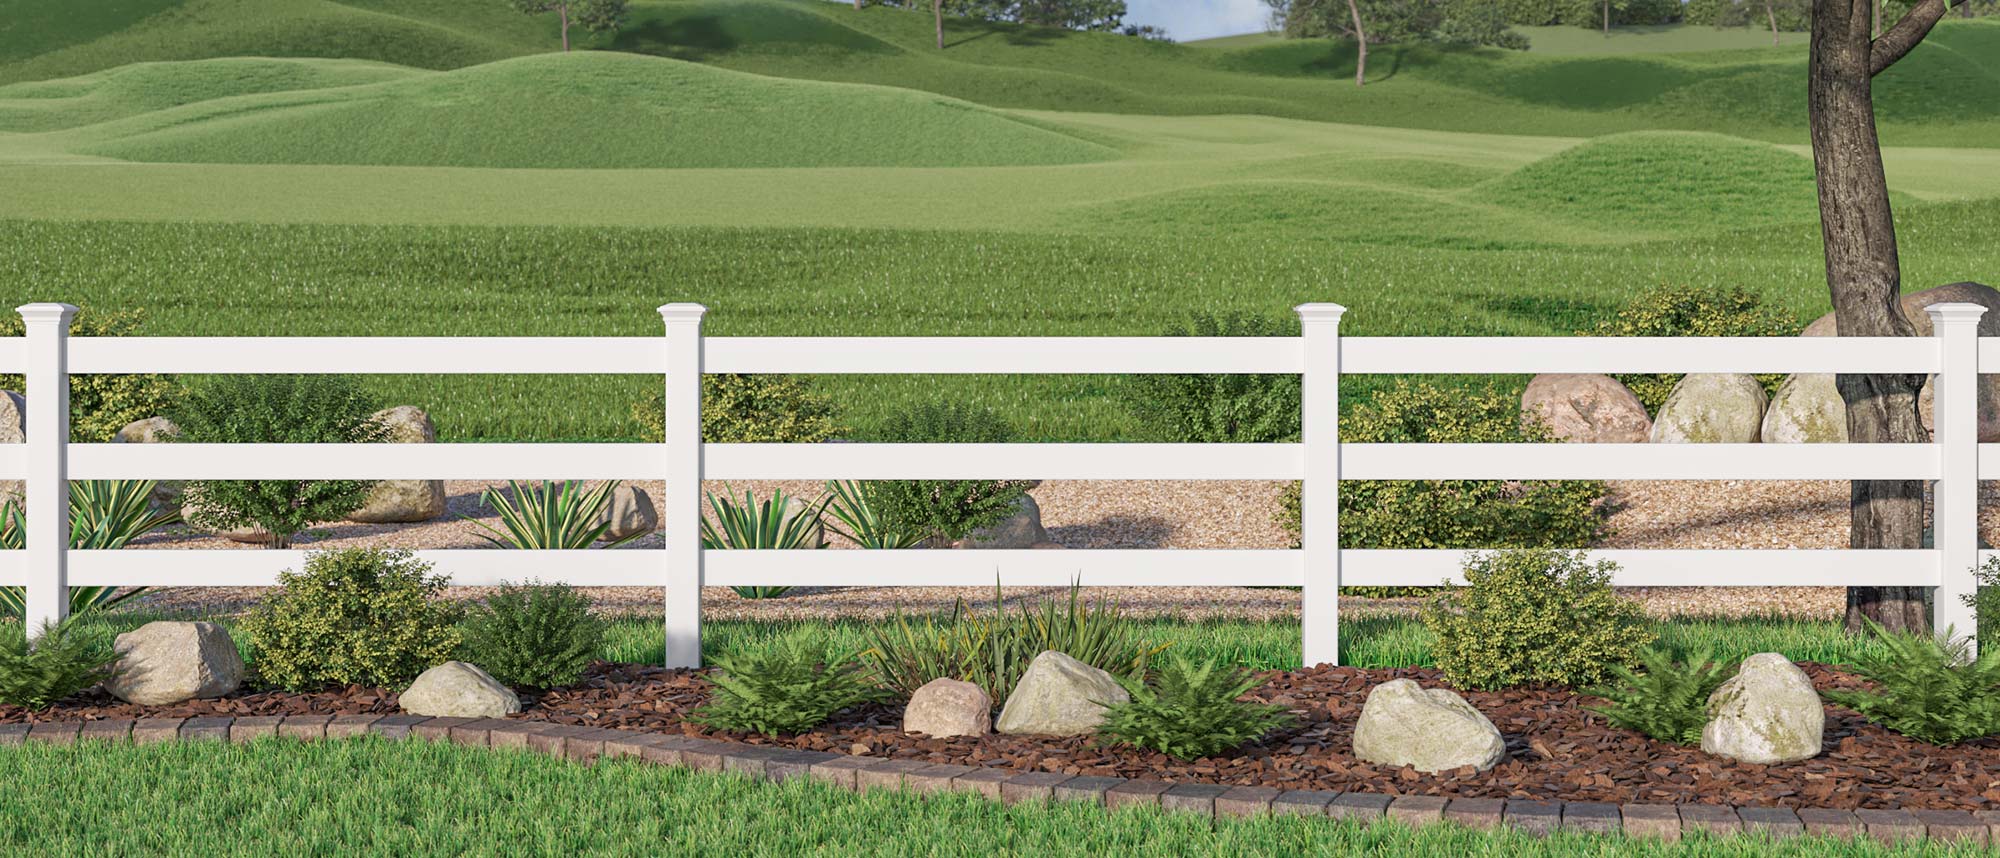 Evansville Indiana Vinyl Security Fence - Ranch Rail 3 Rail Style